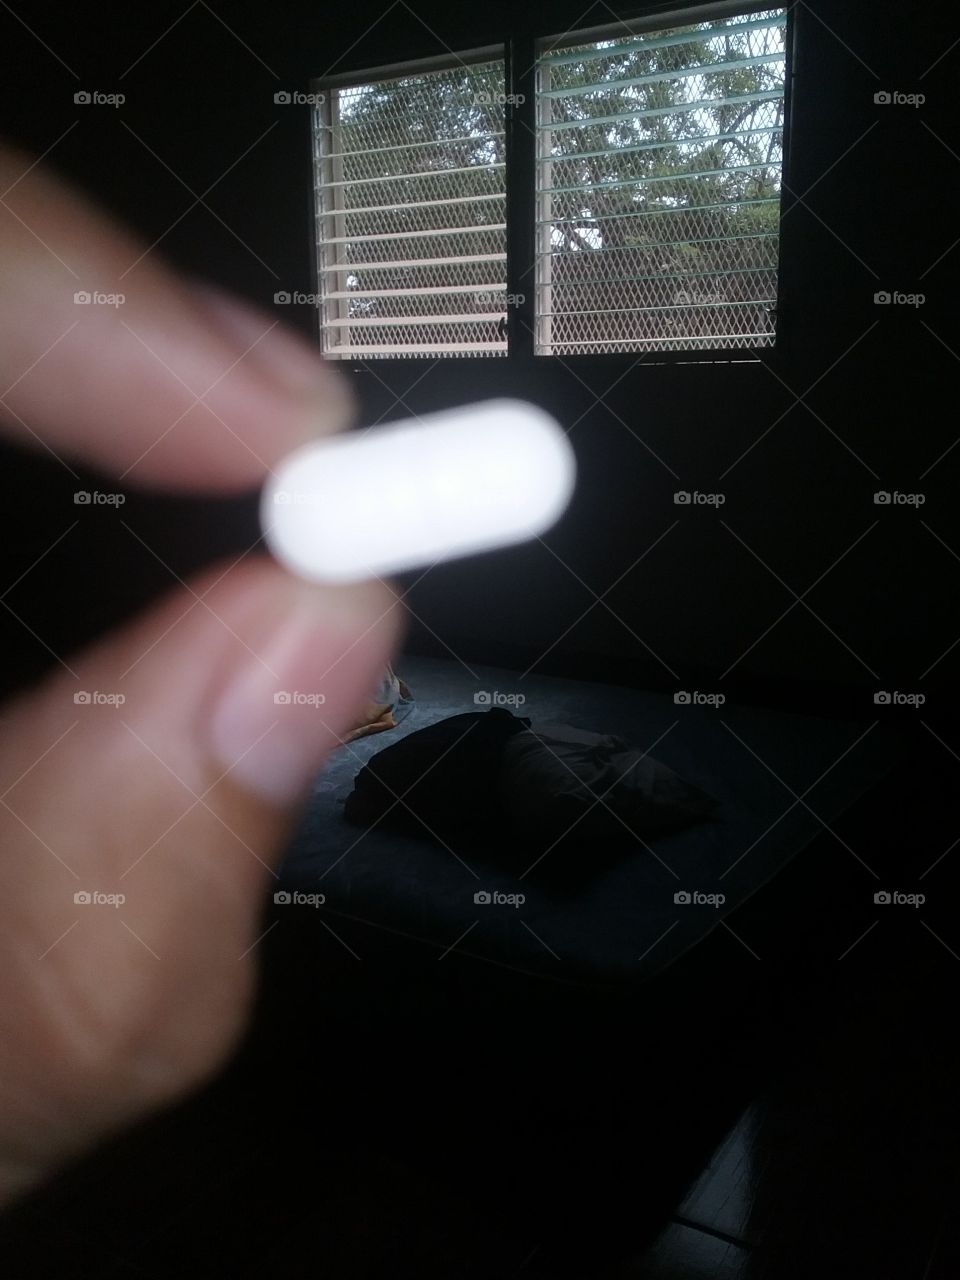 My daily pill (unfocused)